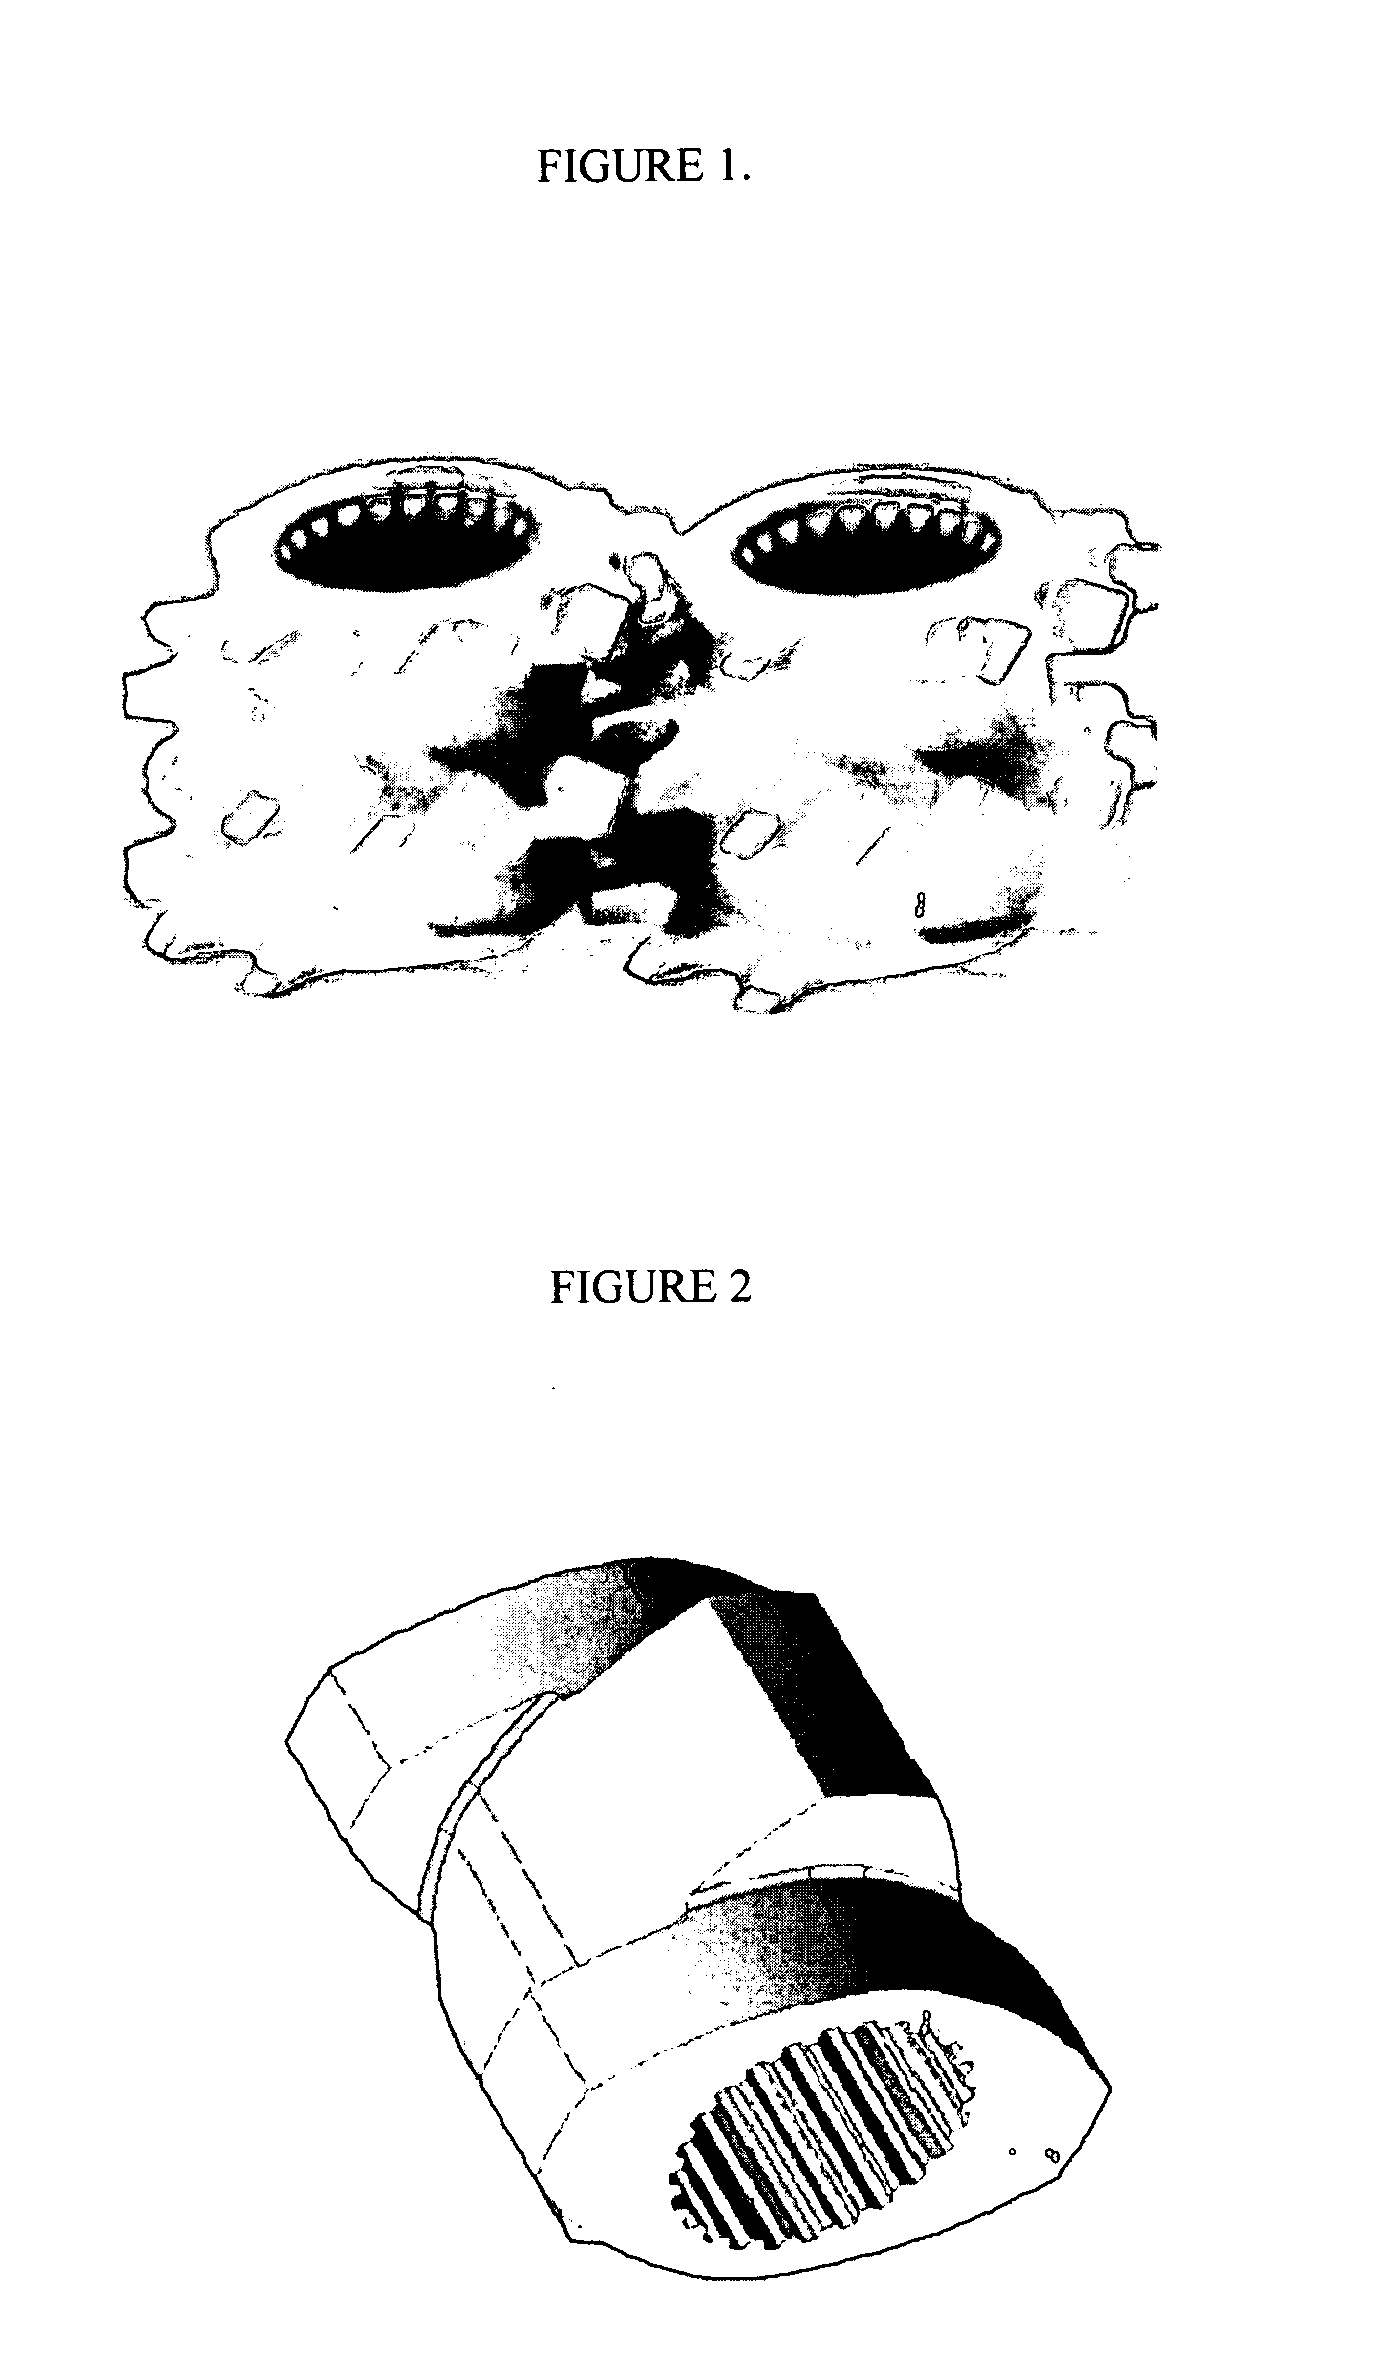 Method for preparing thermoplastic vulcanizates with improved extrusion surfaces